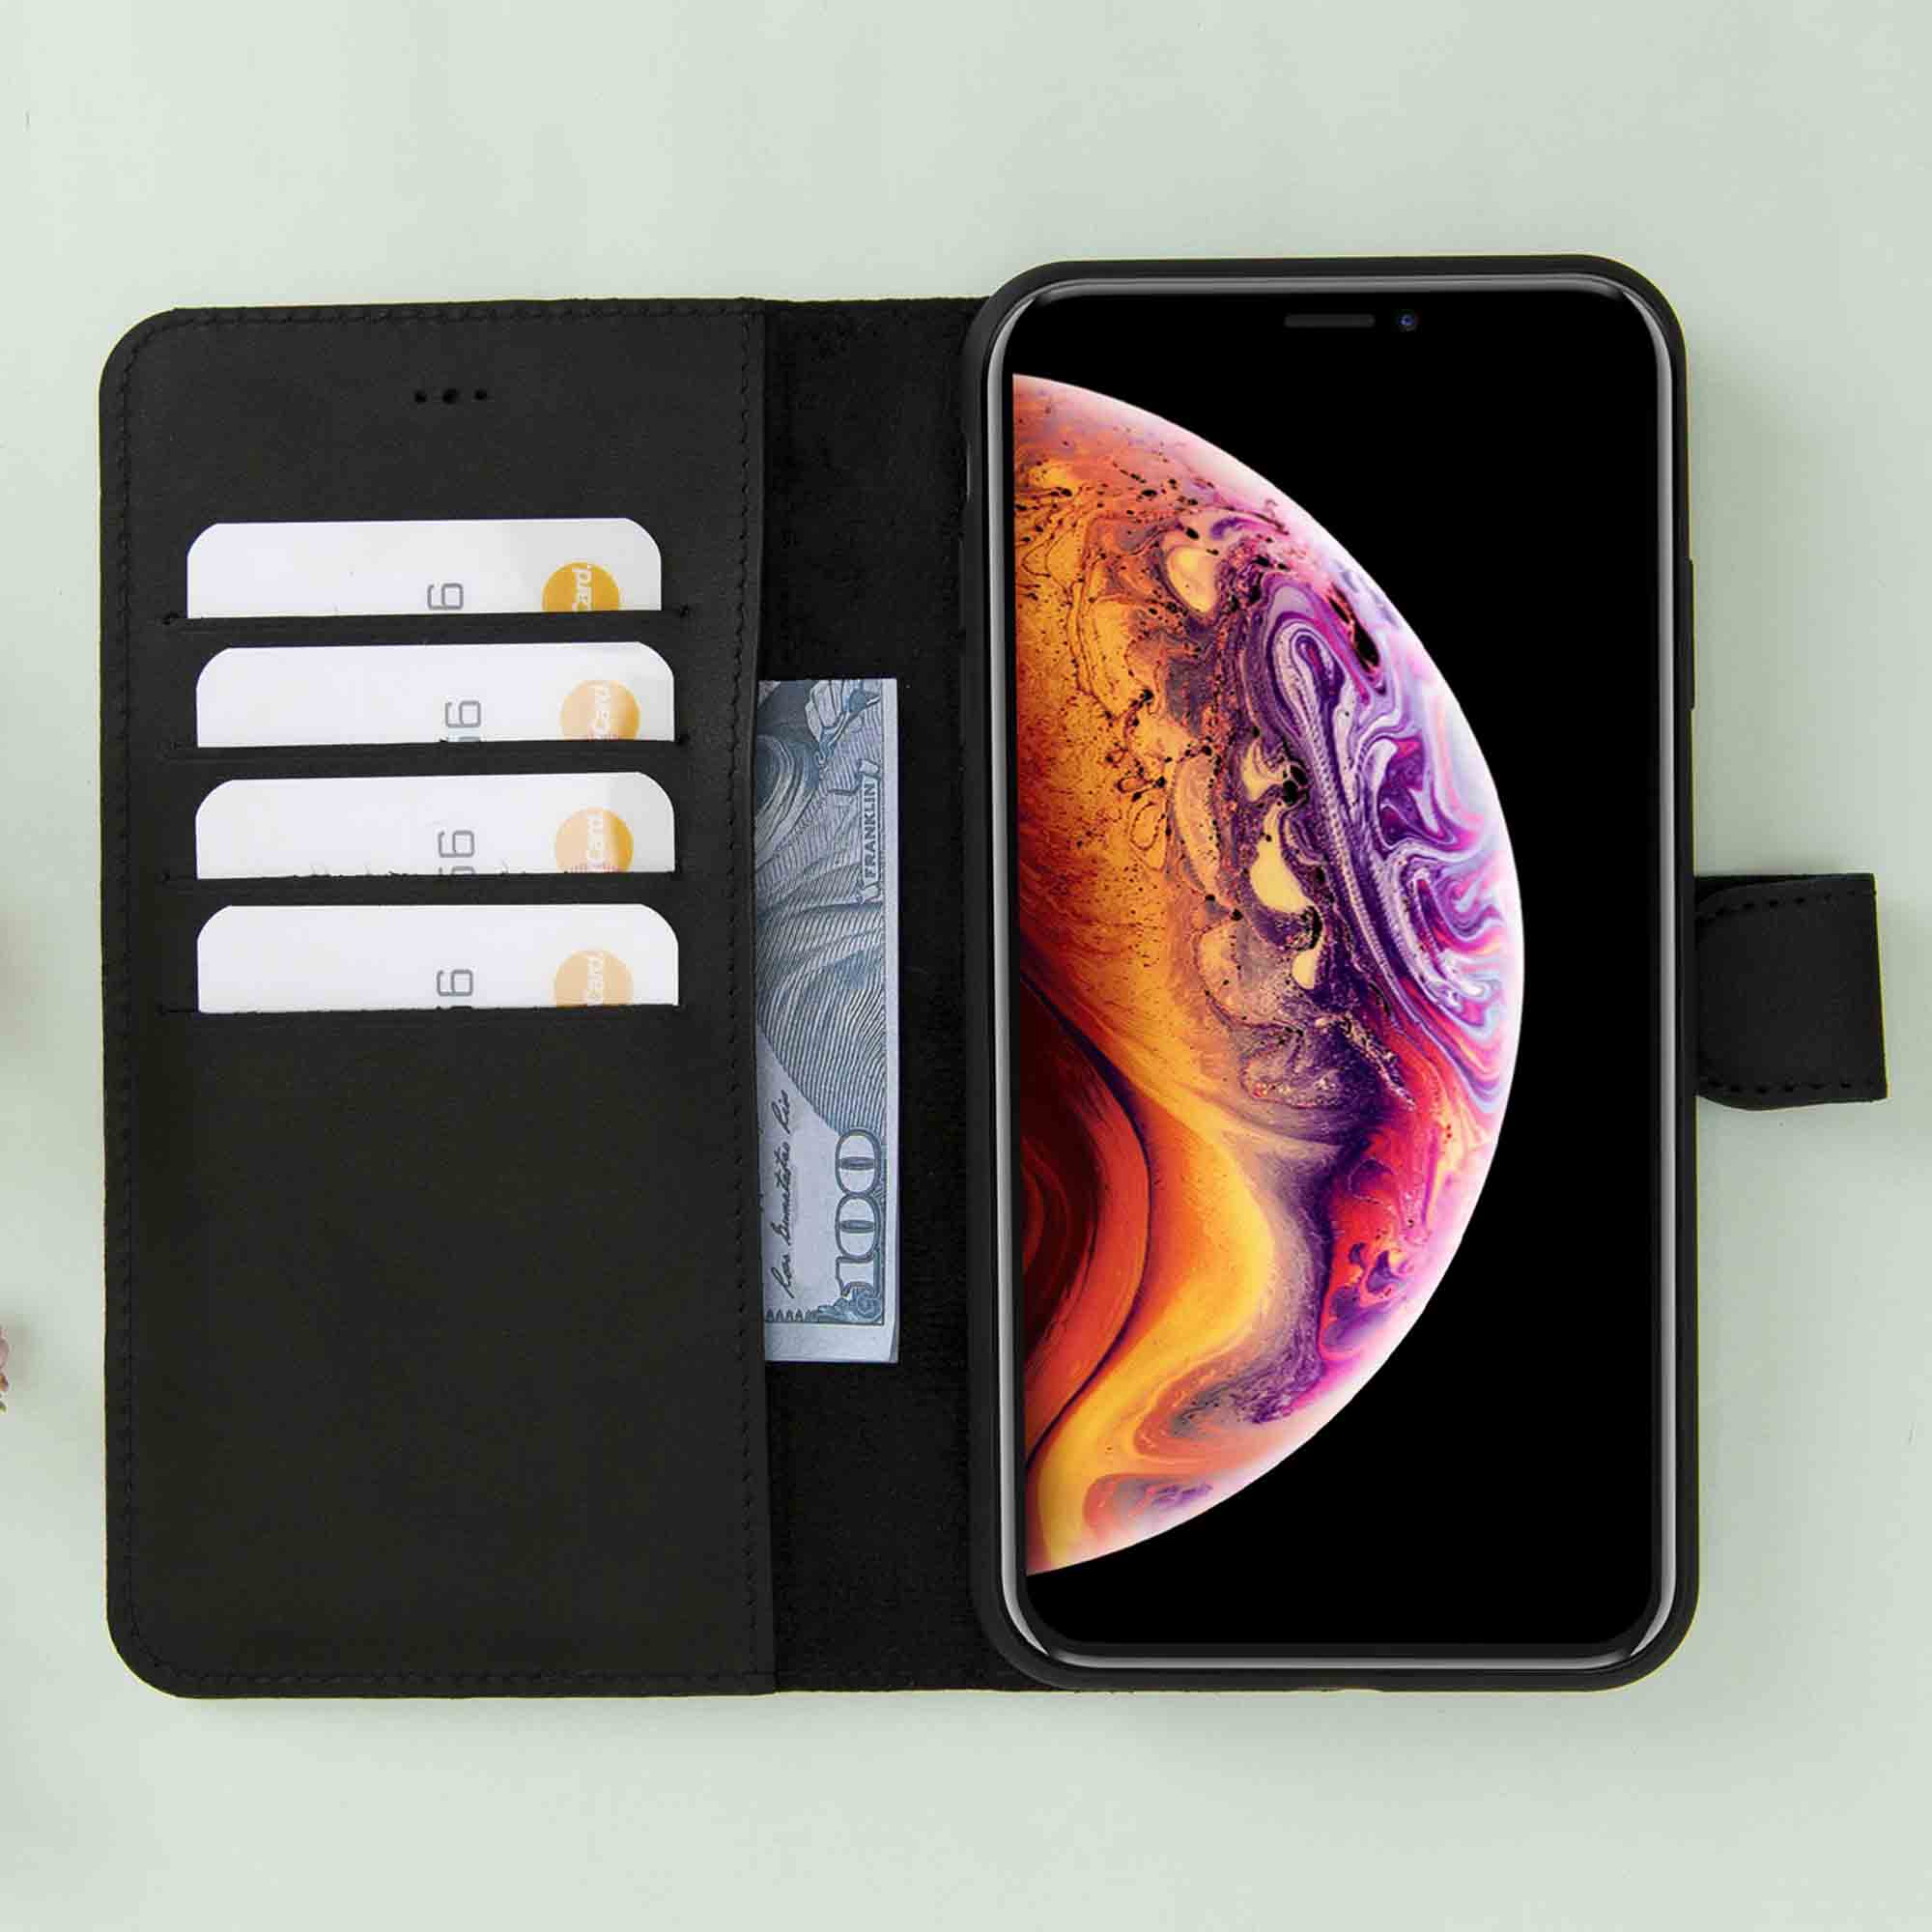 Magic Magnetic Detachable Leather Wallet Case for iPhone XS Max (6.5